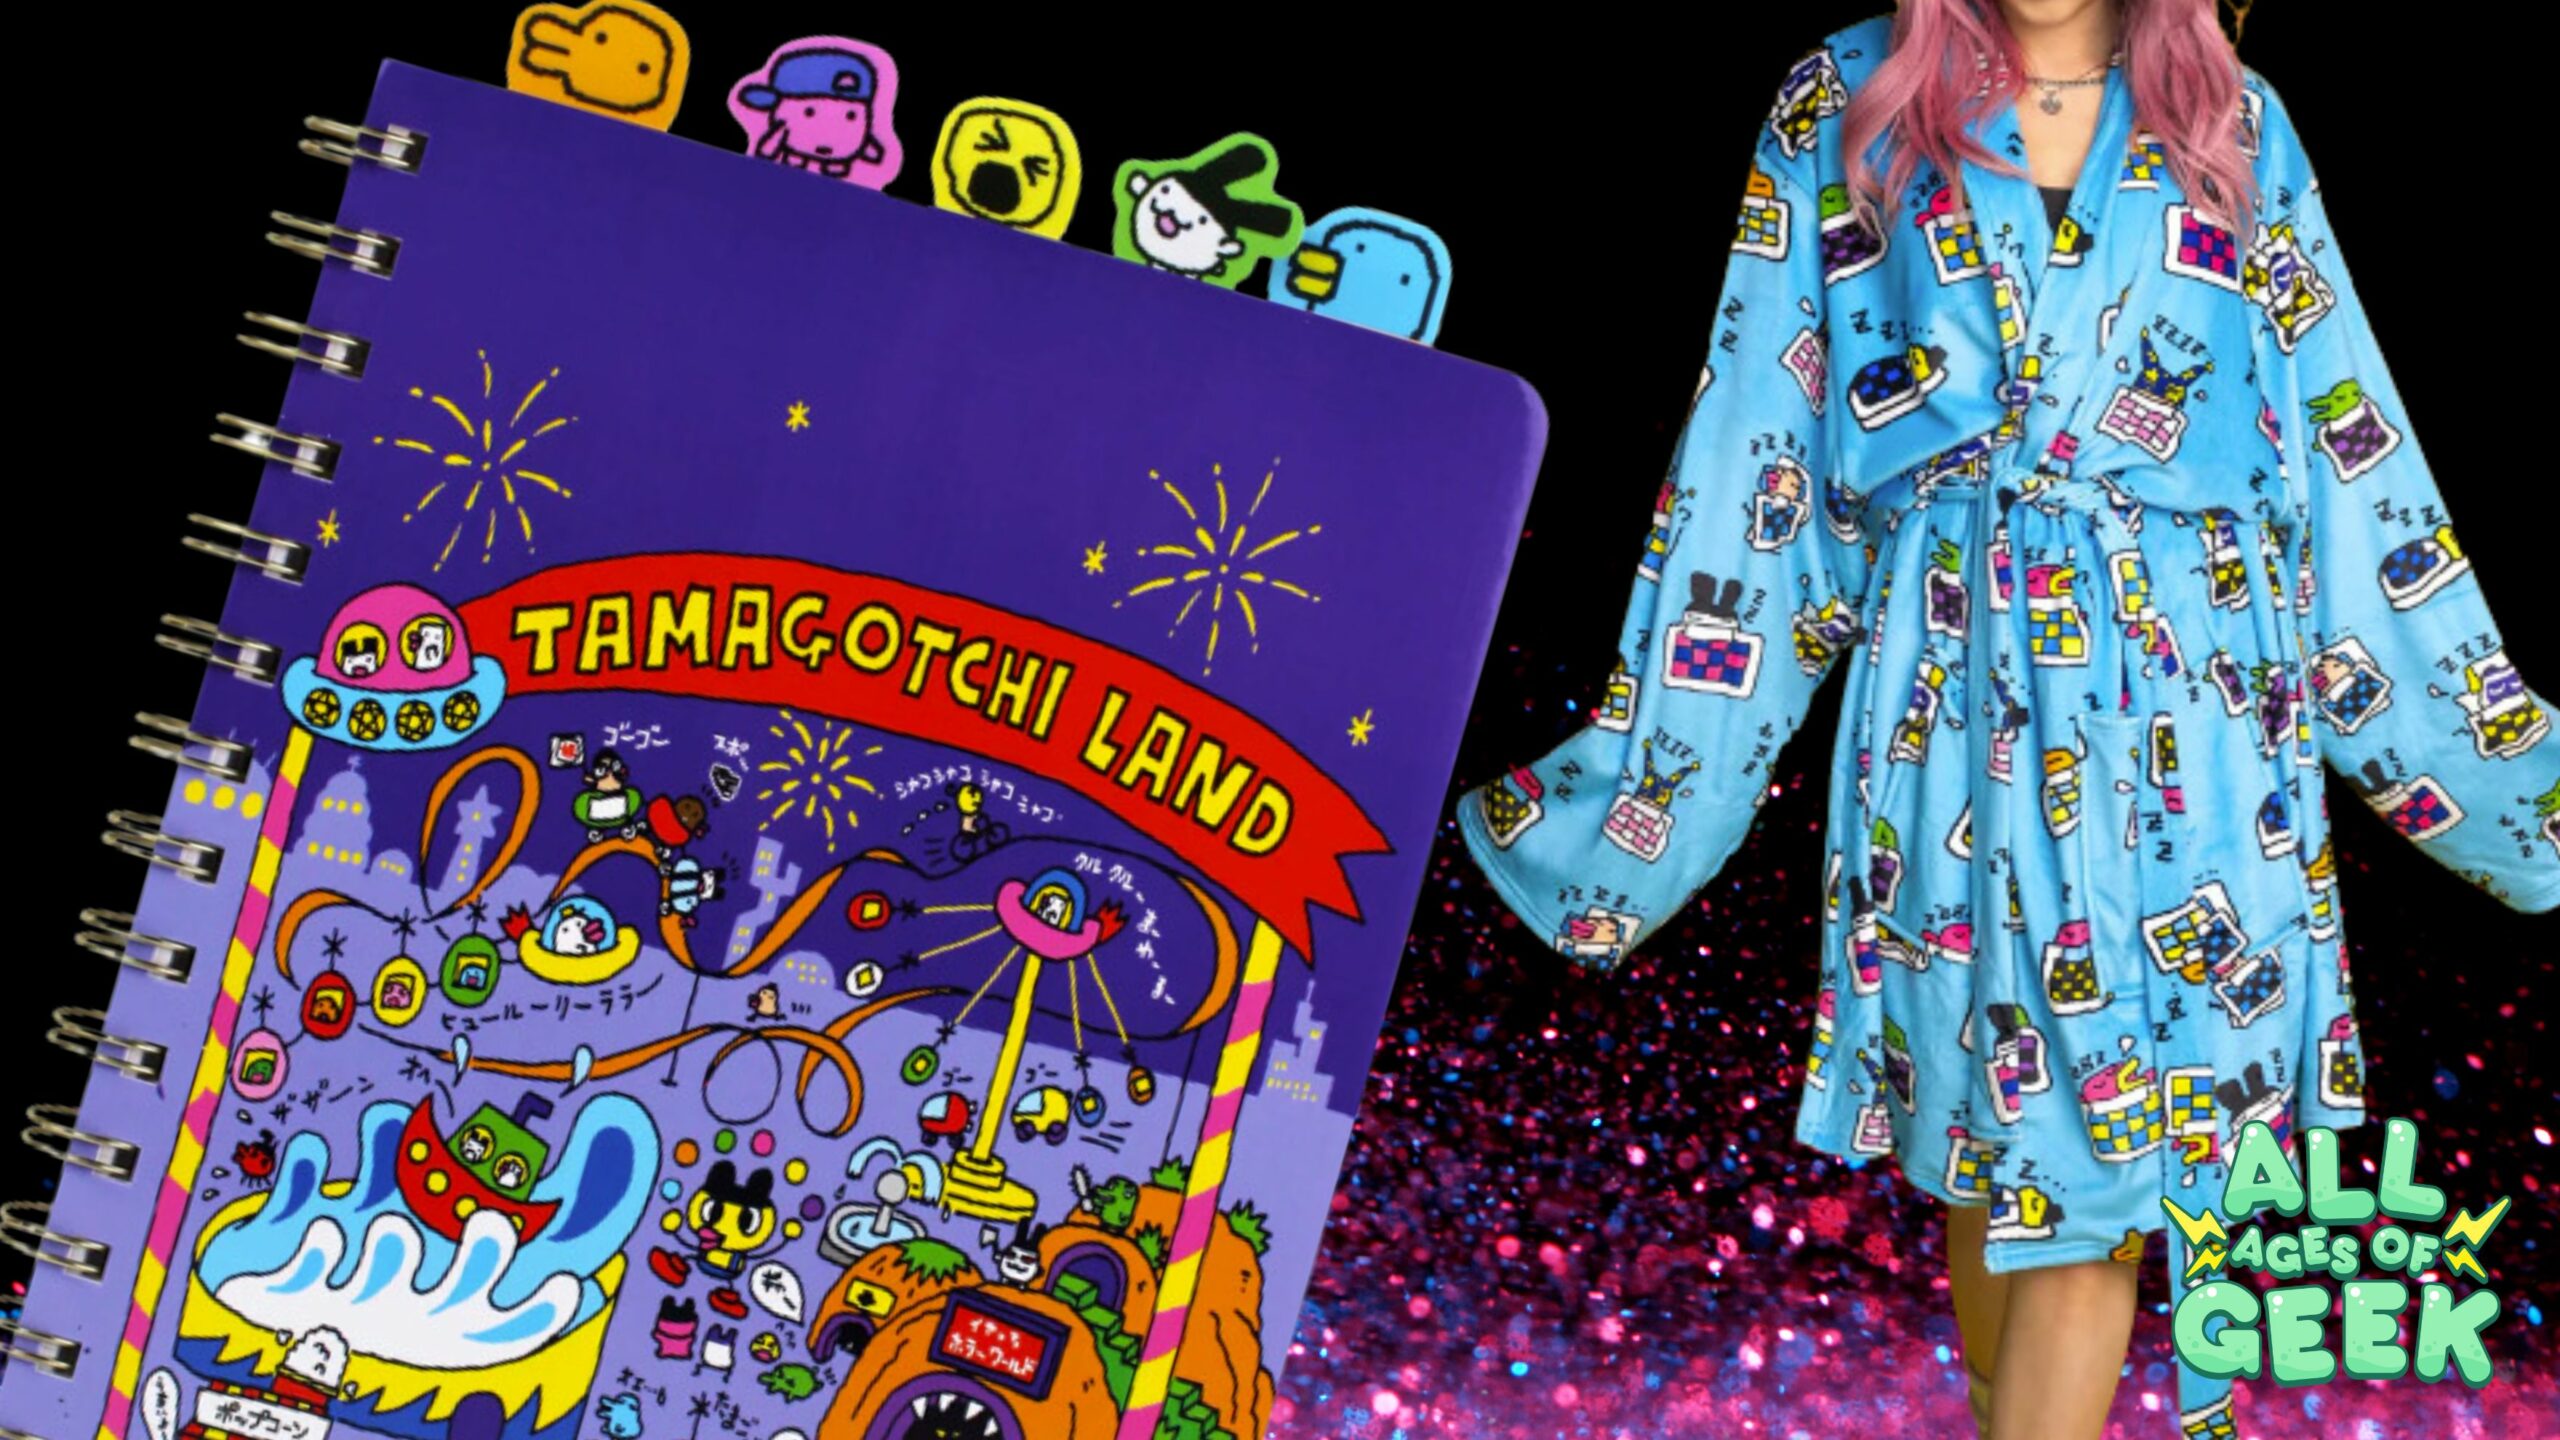 Tamagotchi x Cakeworthy: Top 4 Picks from All Ages of Geek